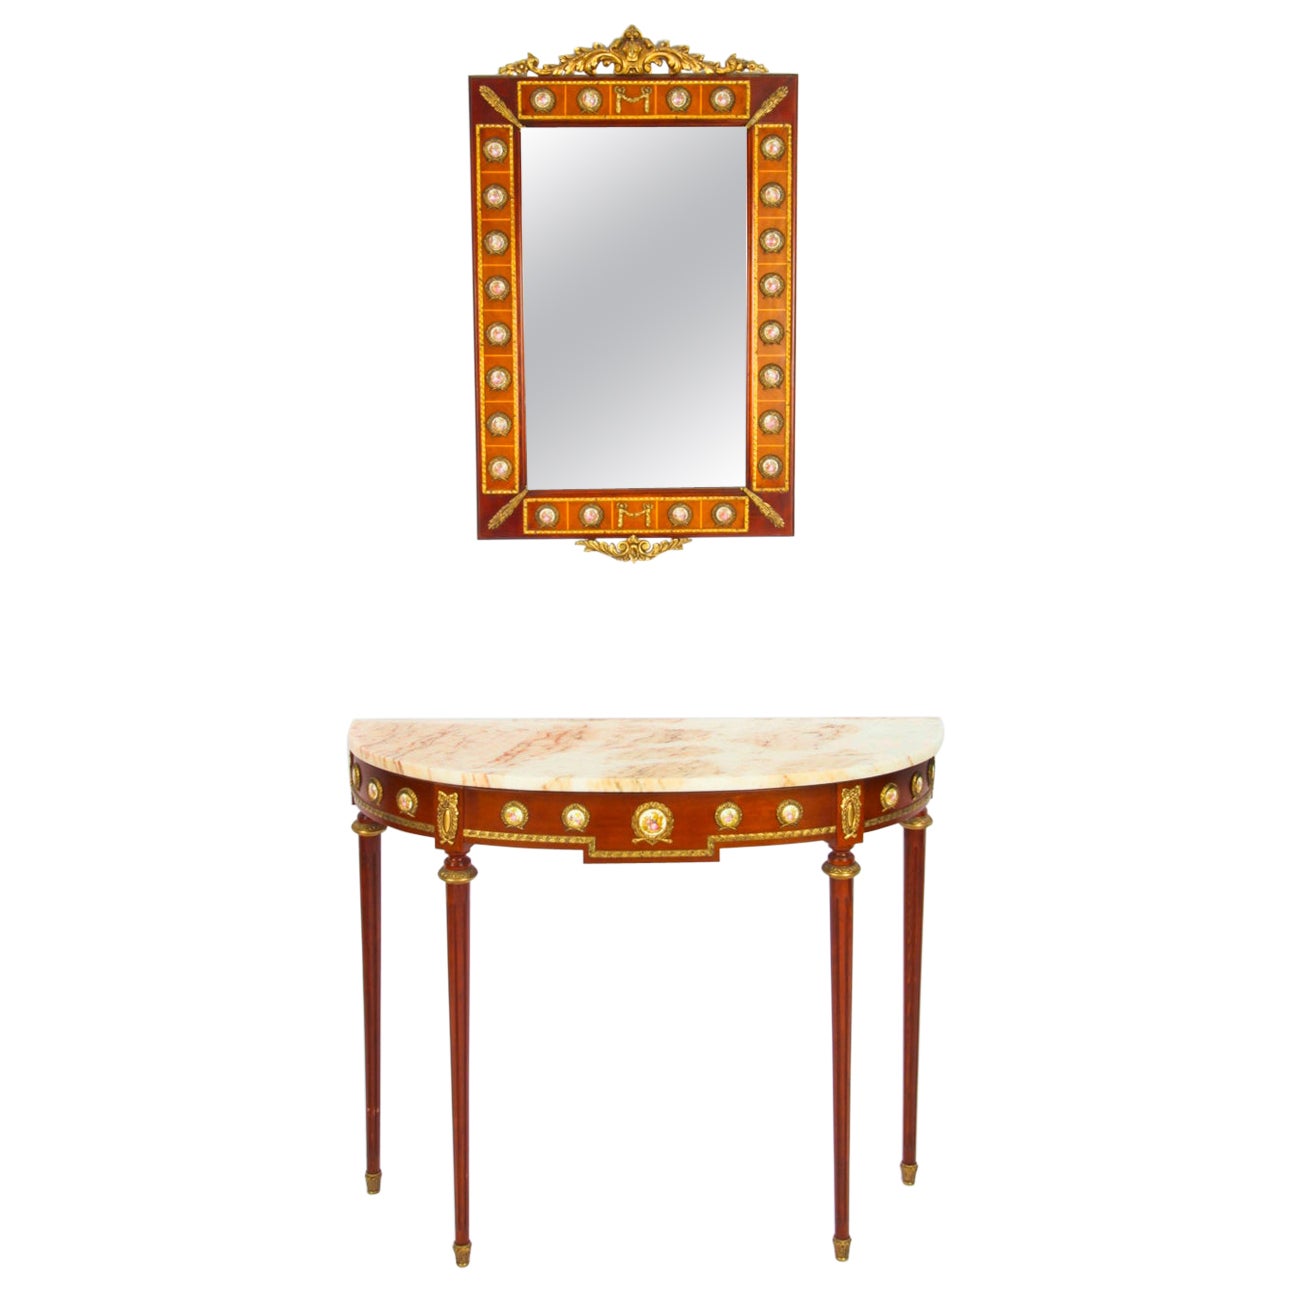 Vintage Ormolu & Porcelain Mounted Console Table & Mirror by Epstein 20th C For Sale